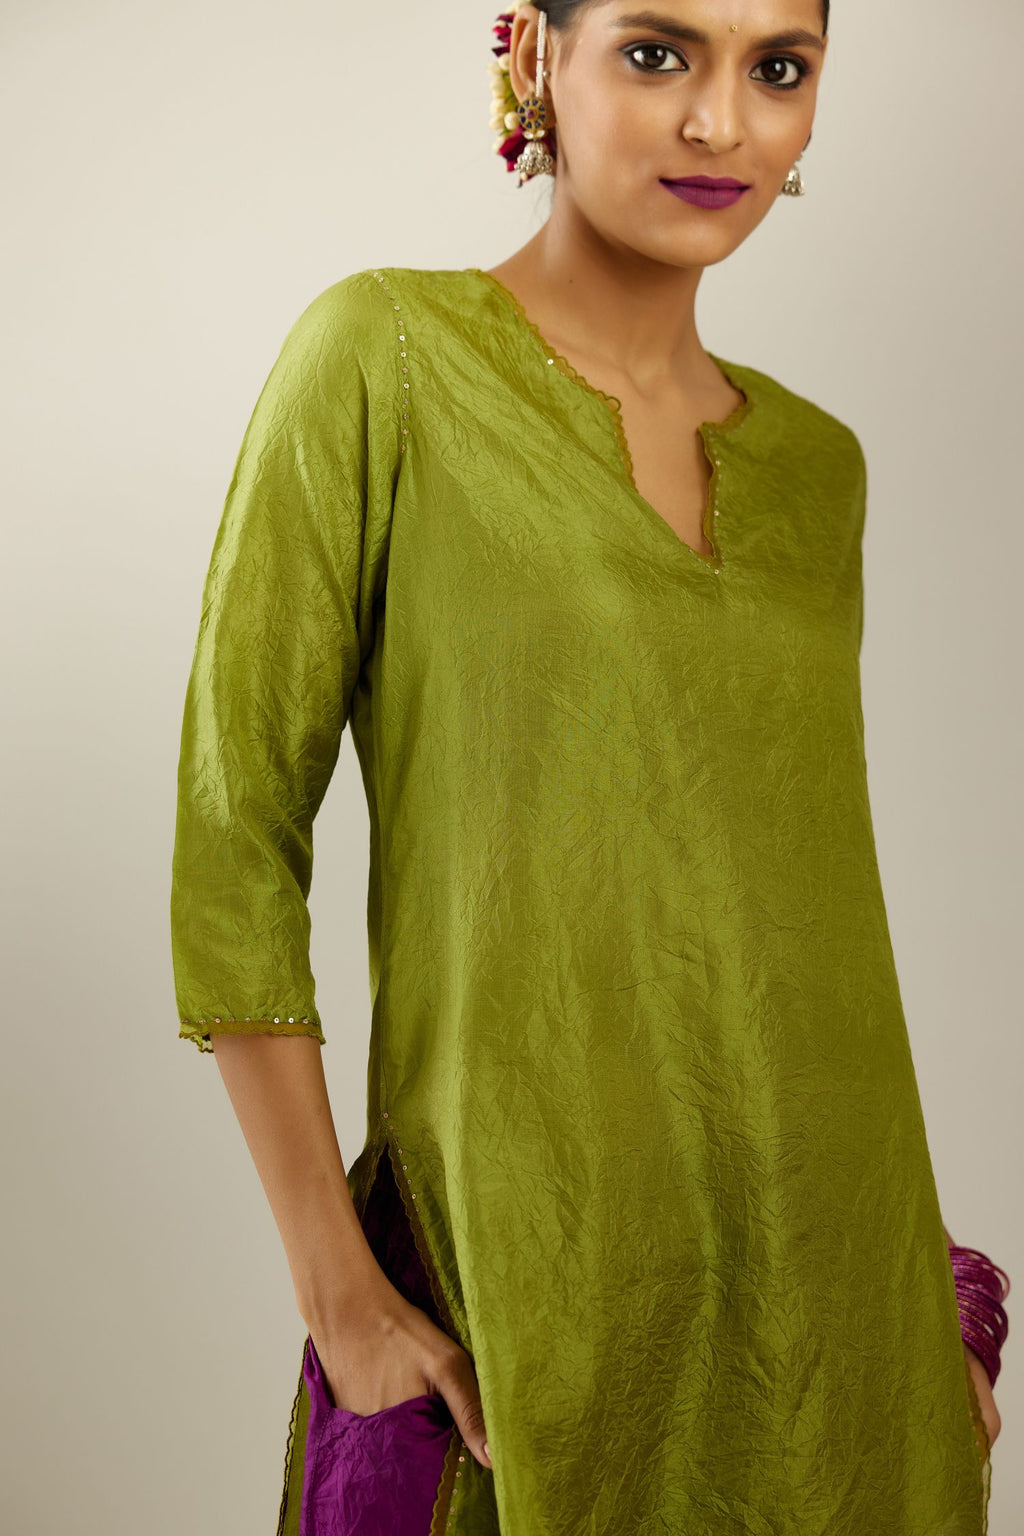 Apple green silk straight kurta set, highlighted with organza and sequins at edges.